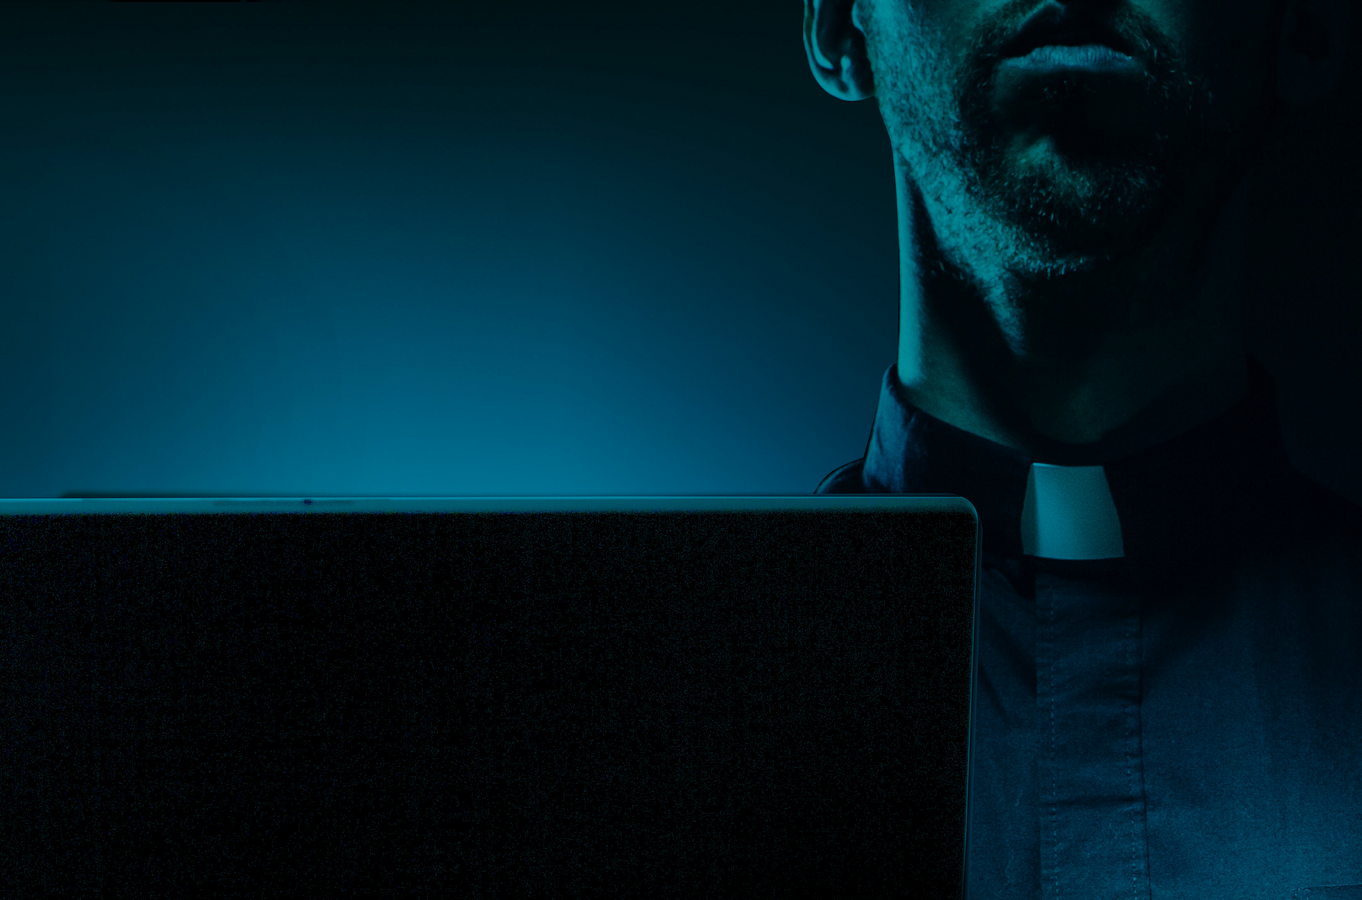 Porn Buffer At Work - Confessions of a Porn-Addicted Priest | America Magazine